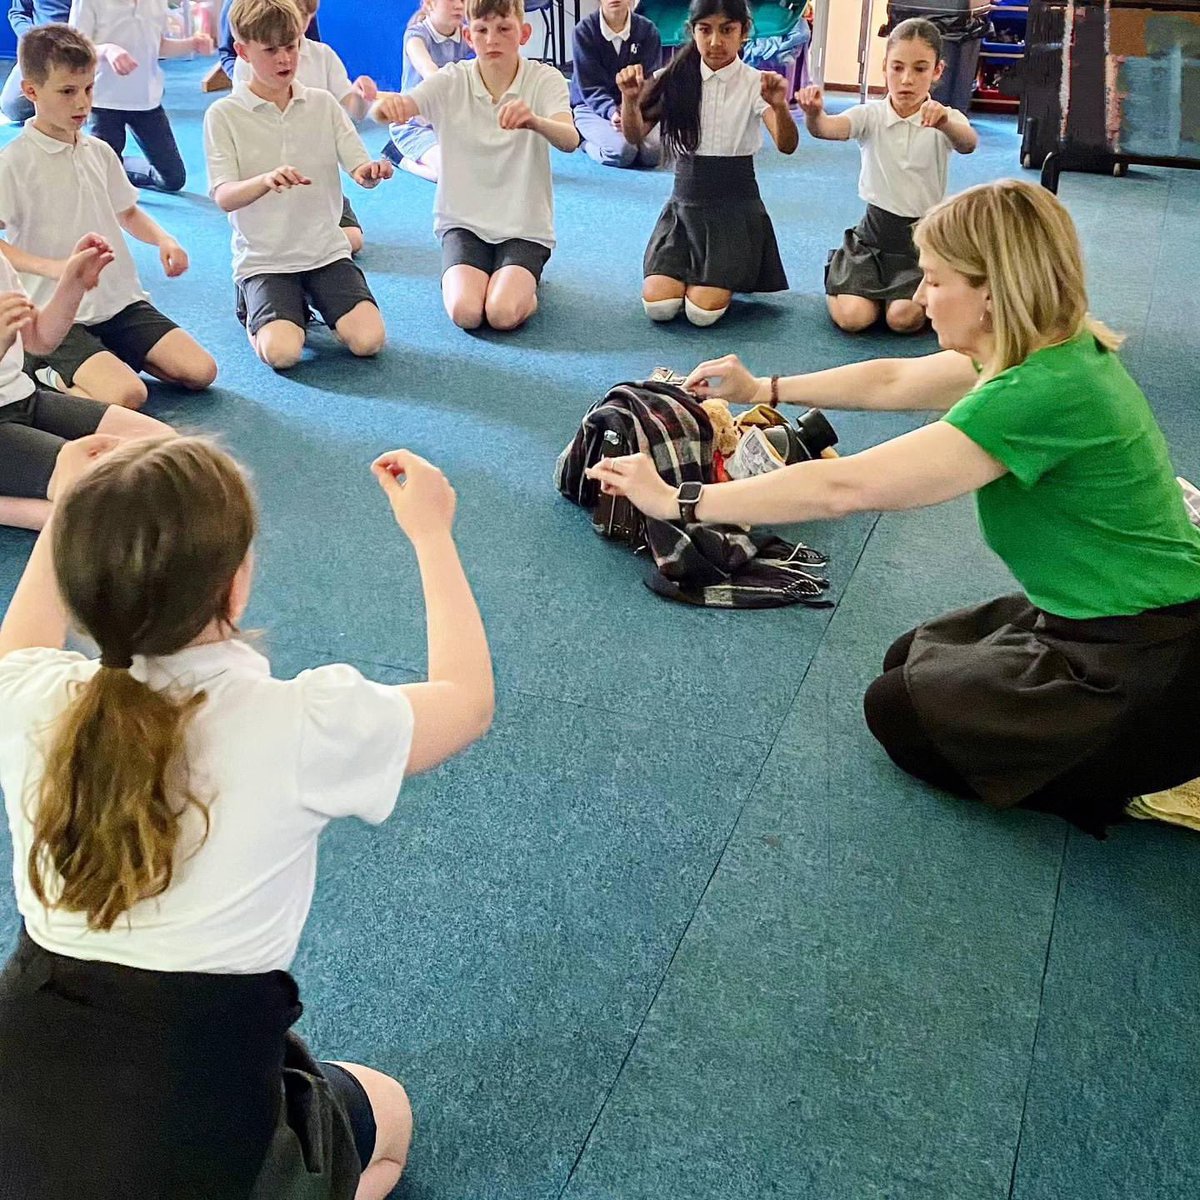 Year 5 pupils used a wide range of techniques in their drama session last week, exploring the emotional subject of the evacuation of children during World War Two. Our children thoroughly engaged with the session, and produced some brilliant work @TheatriKidsUK